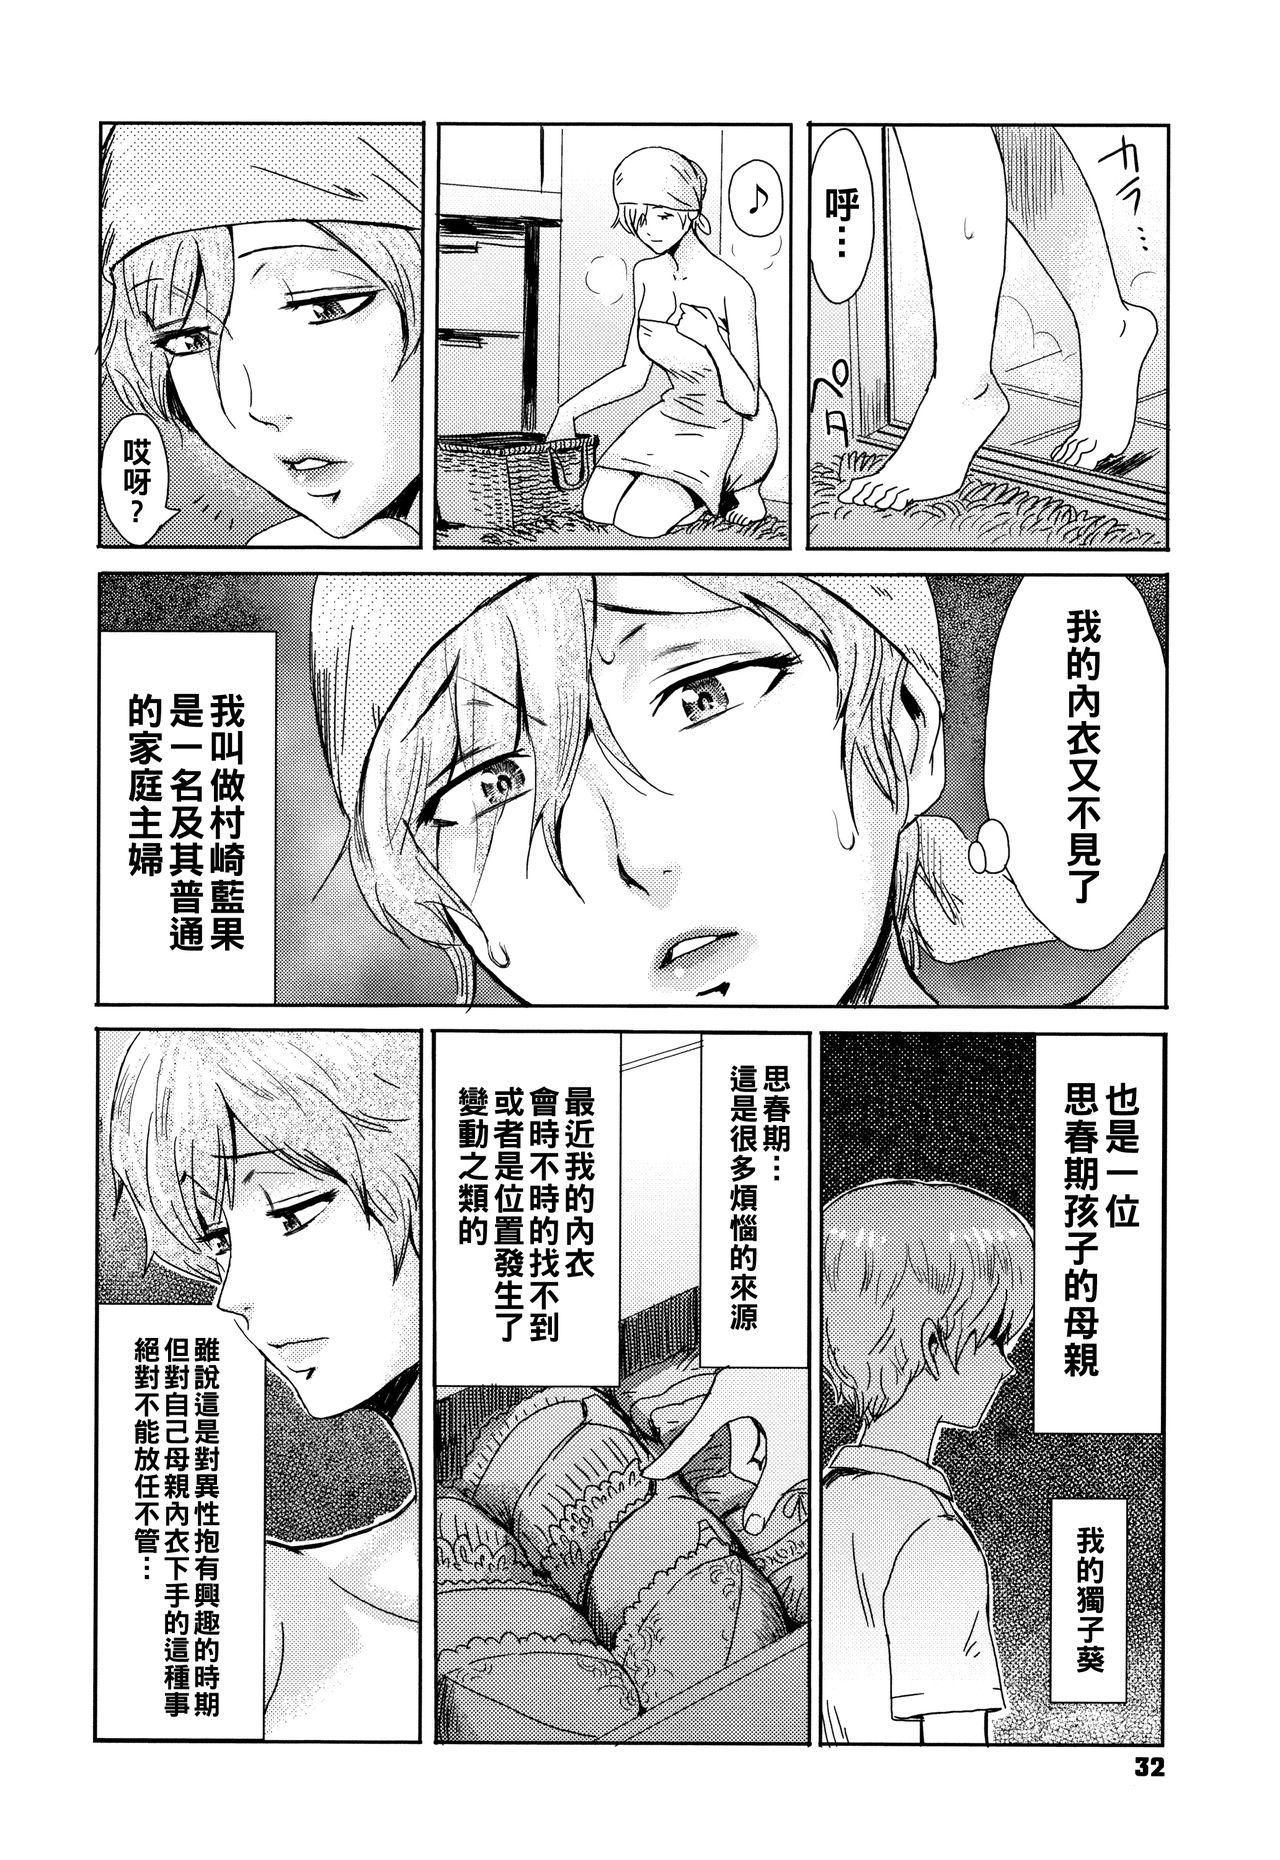 Class Room たべごろ 背徳の果実 1（Chinese） Realamateur - Page 2